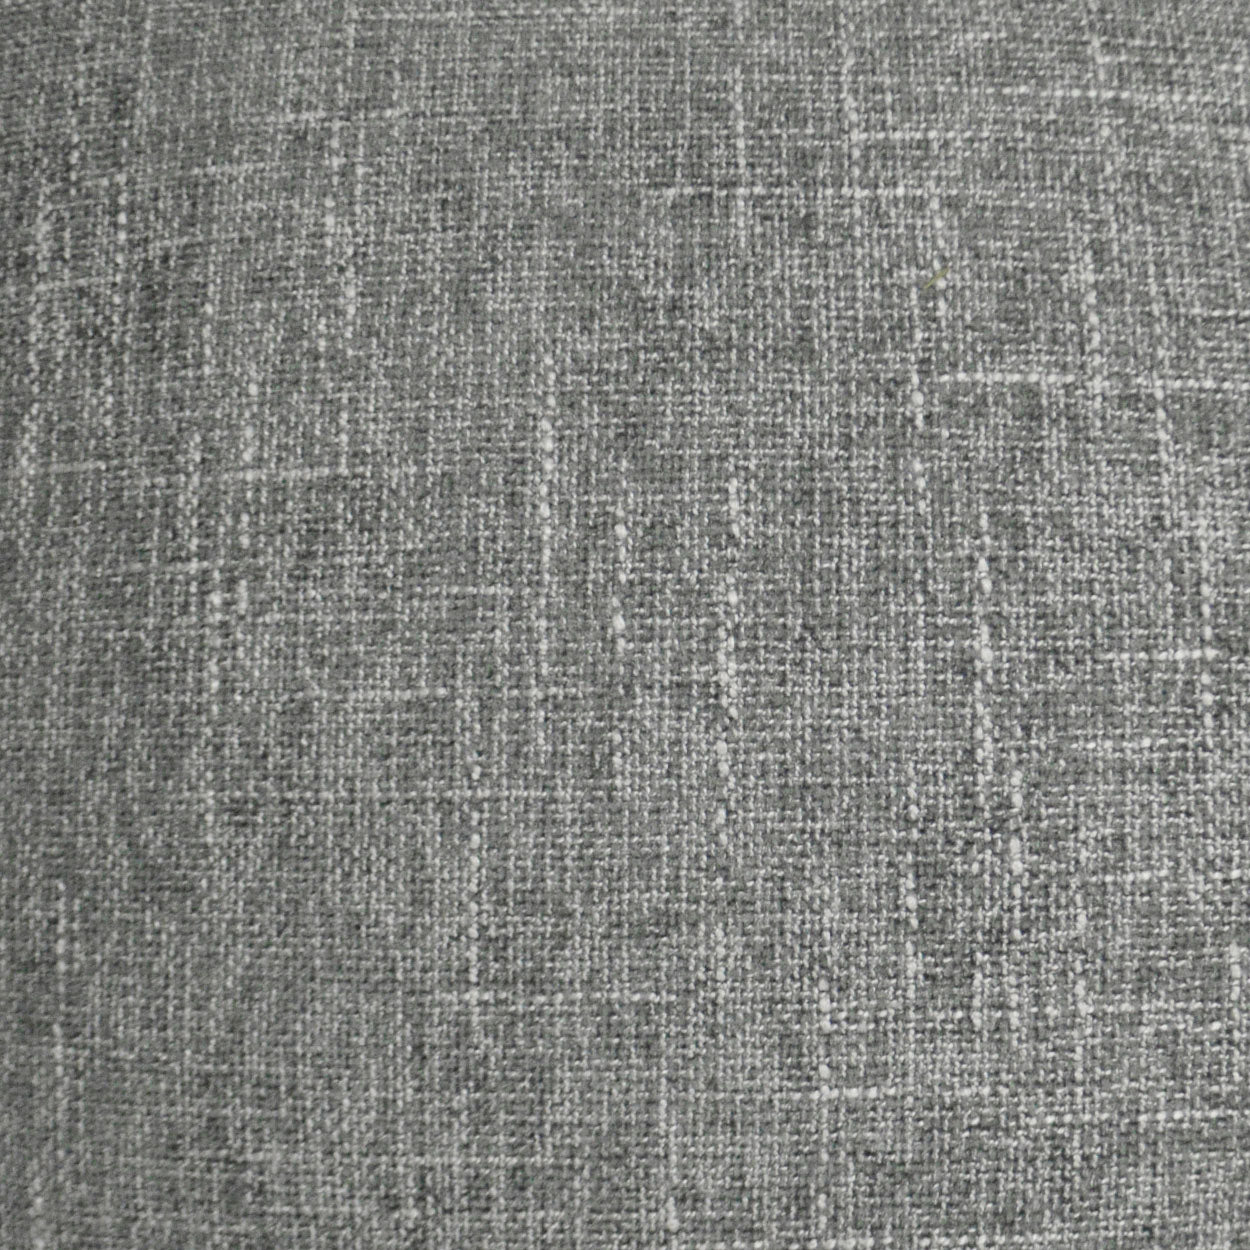 3054-G-front-fabric-1 Mixology-Graphite c